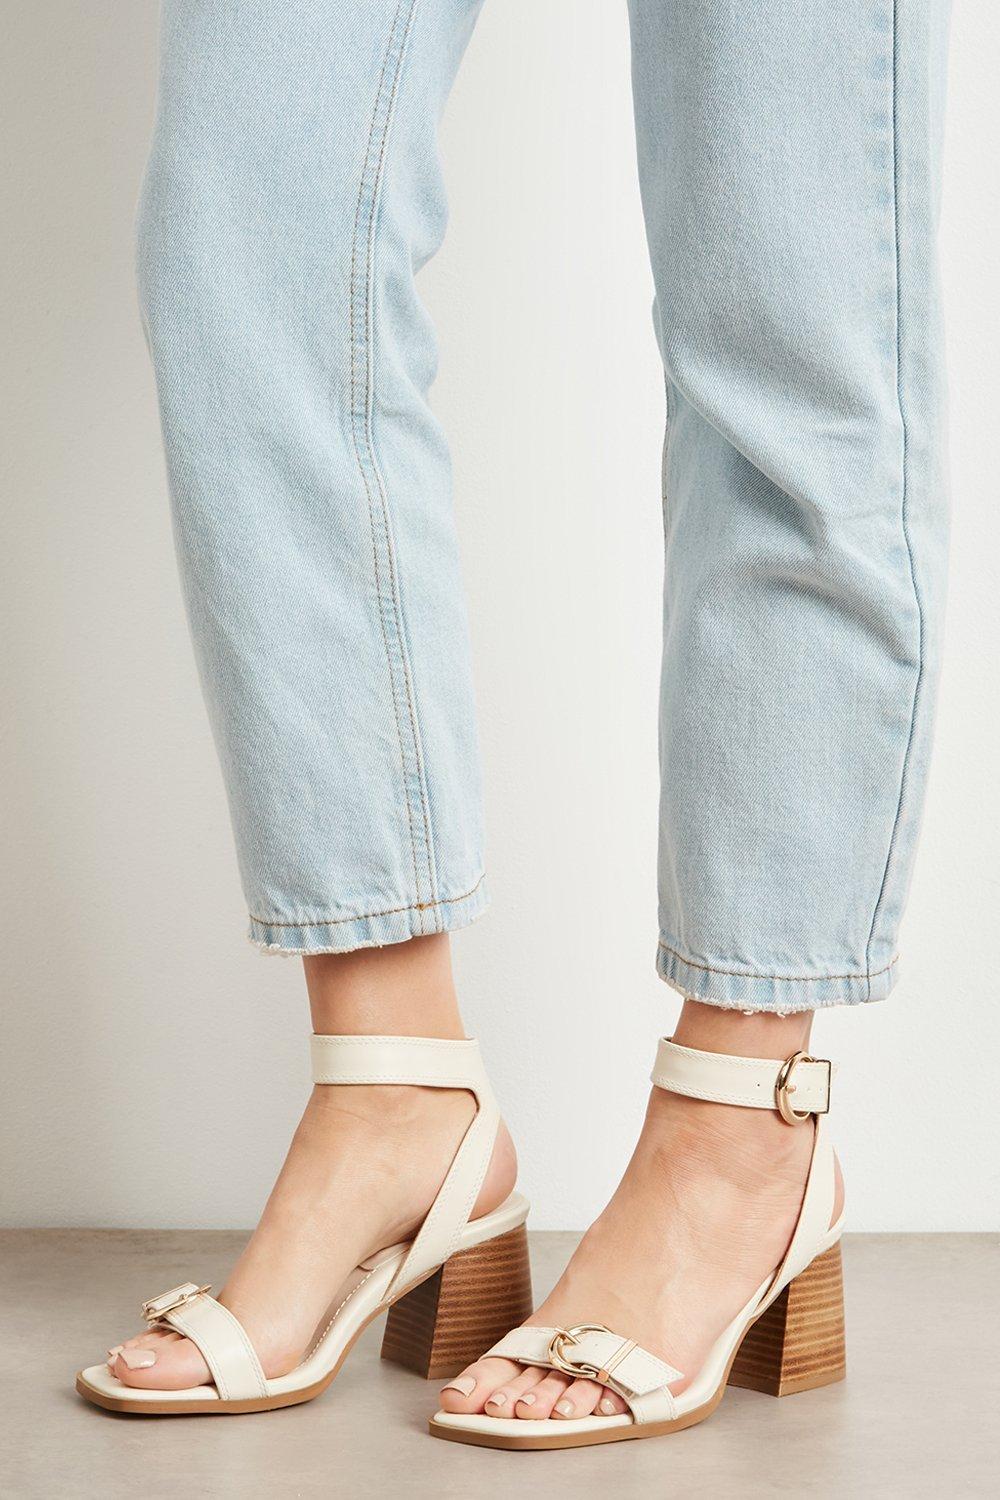 Image of Womens Principles: Daphne Barely There Heels